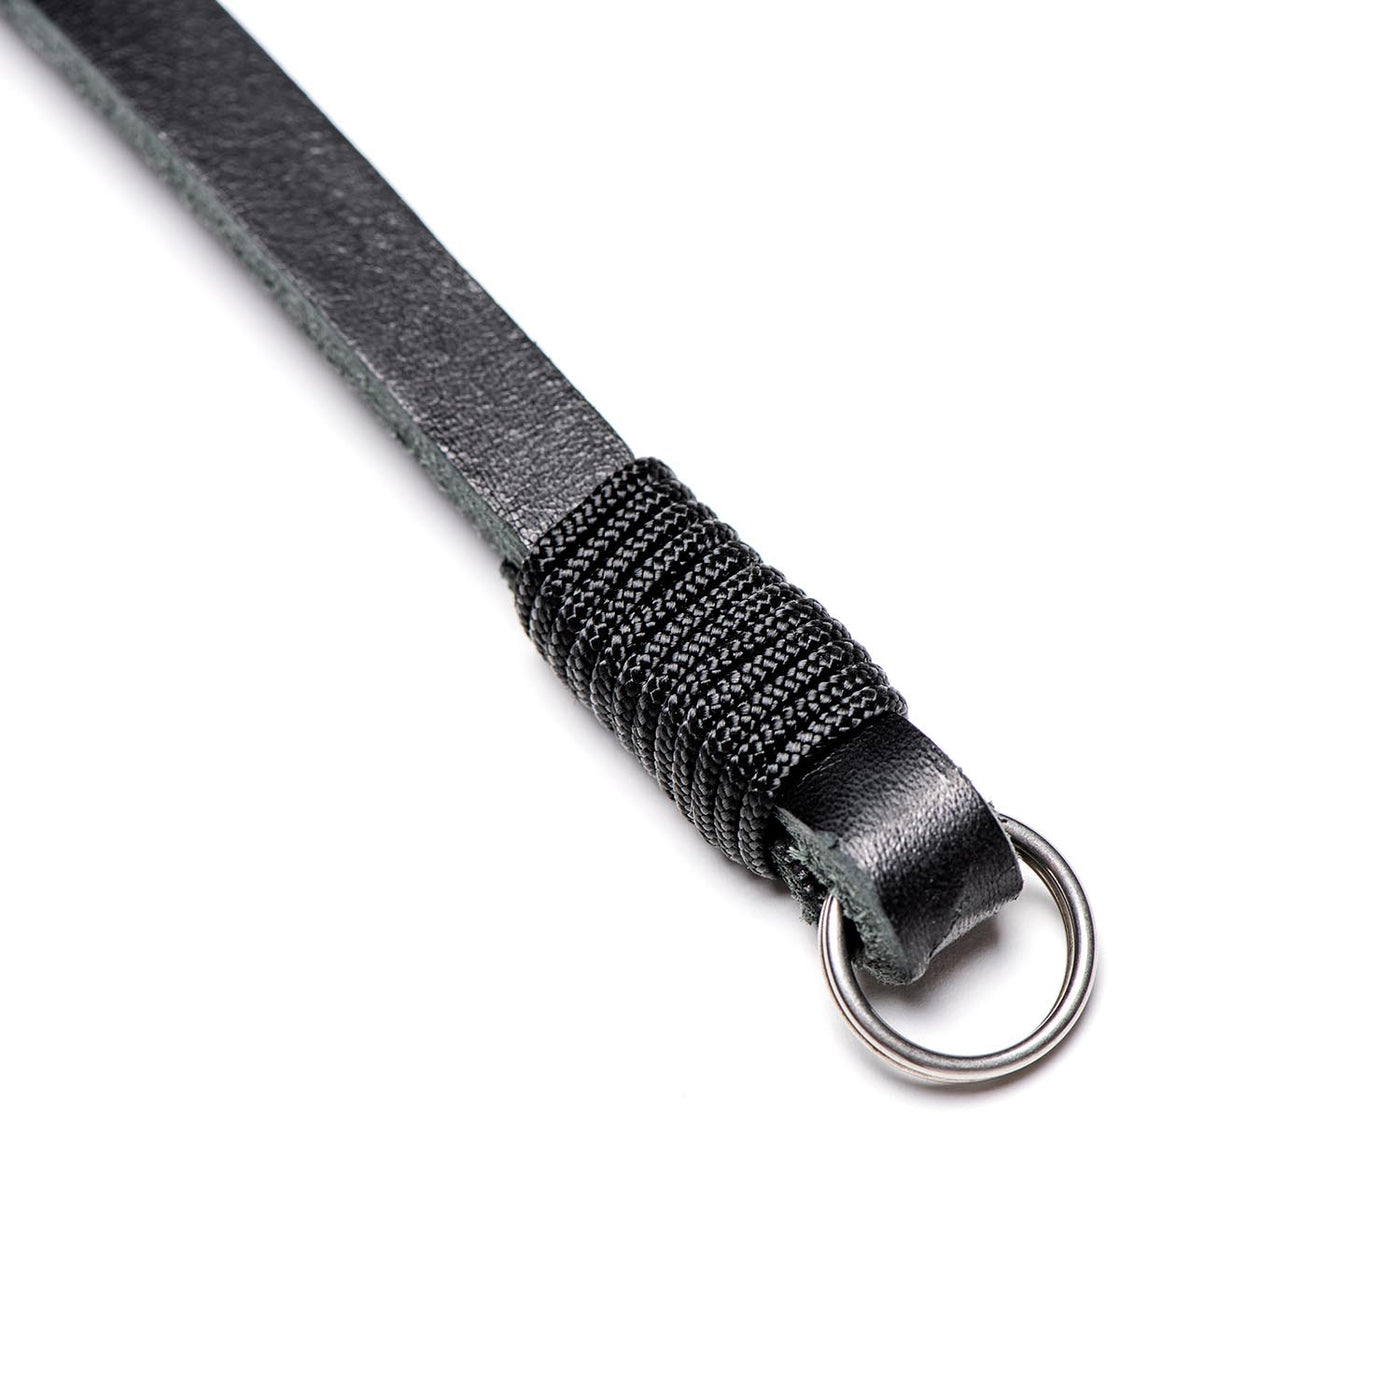 Leica Paracord Strap created by COOPH